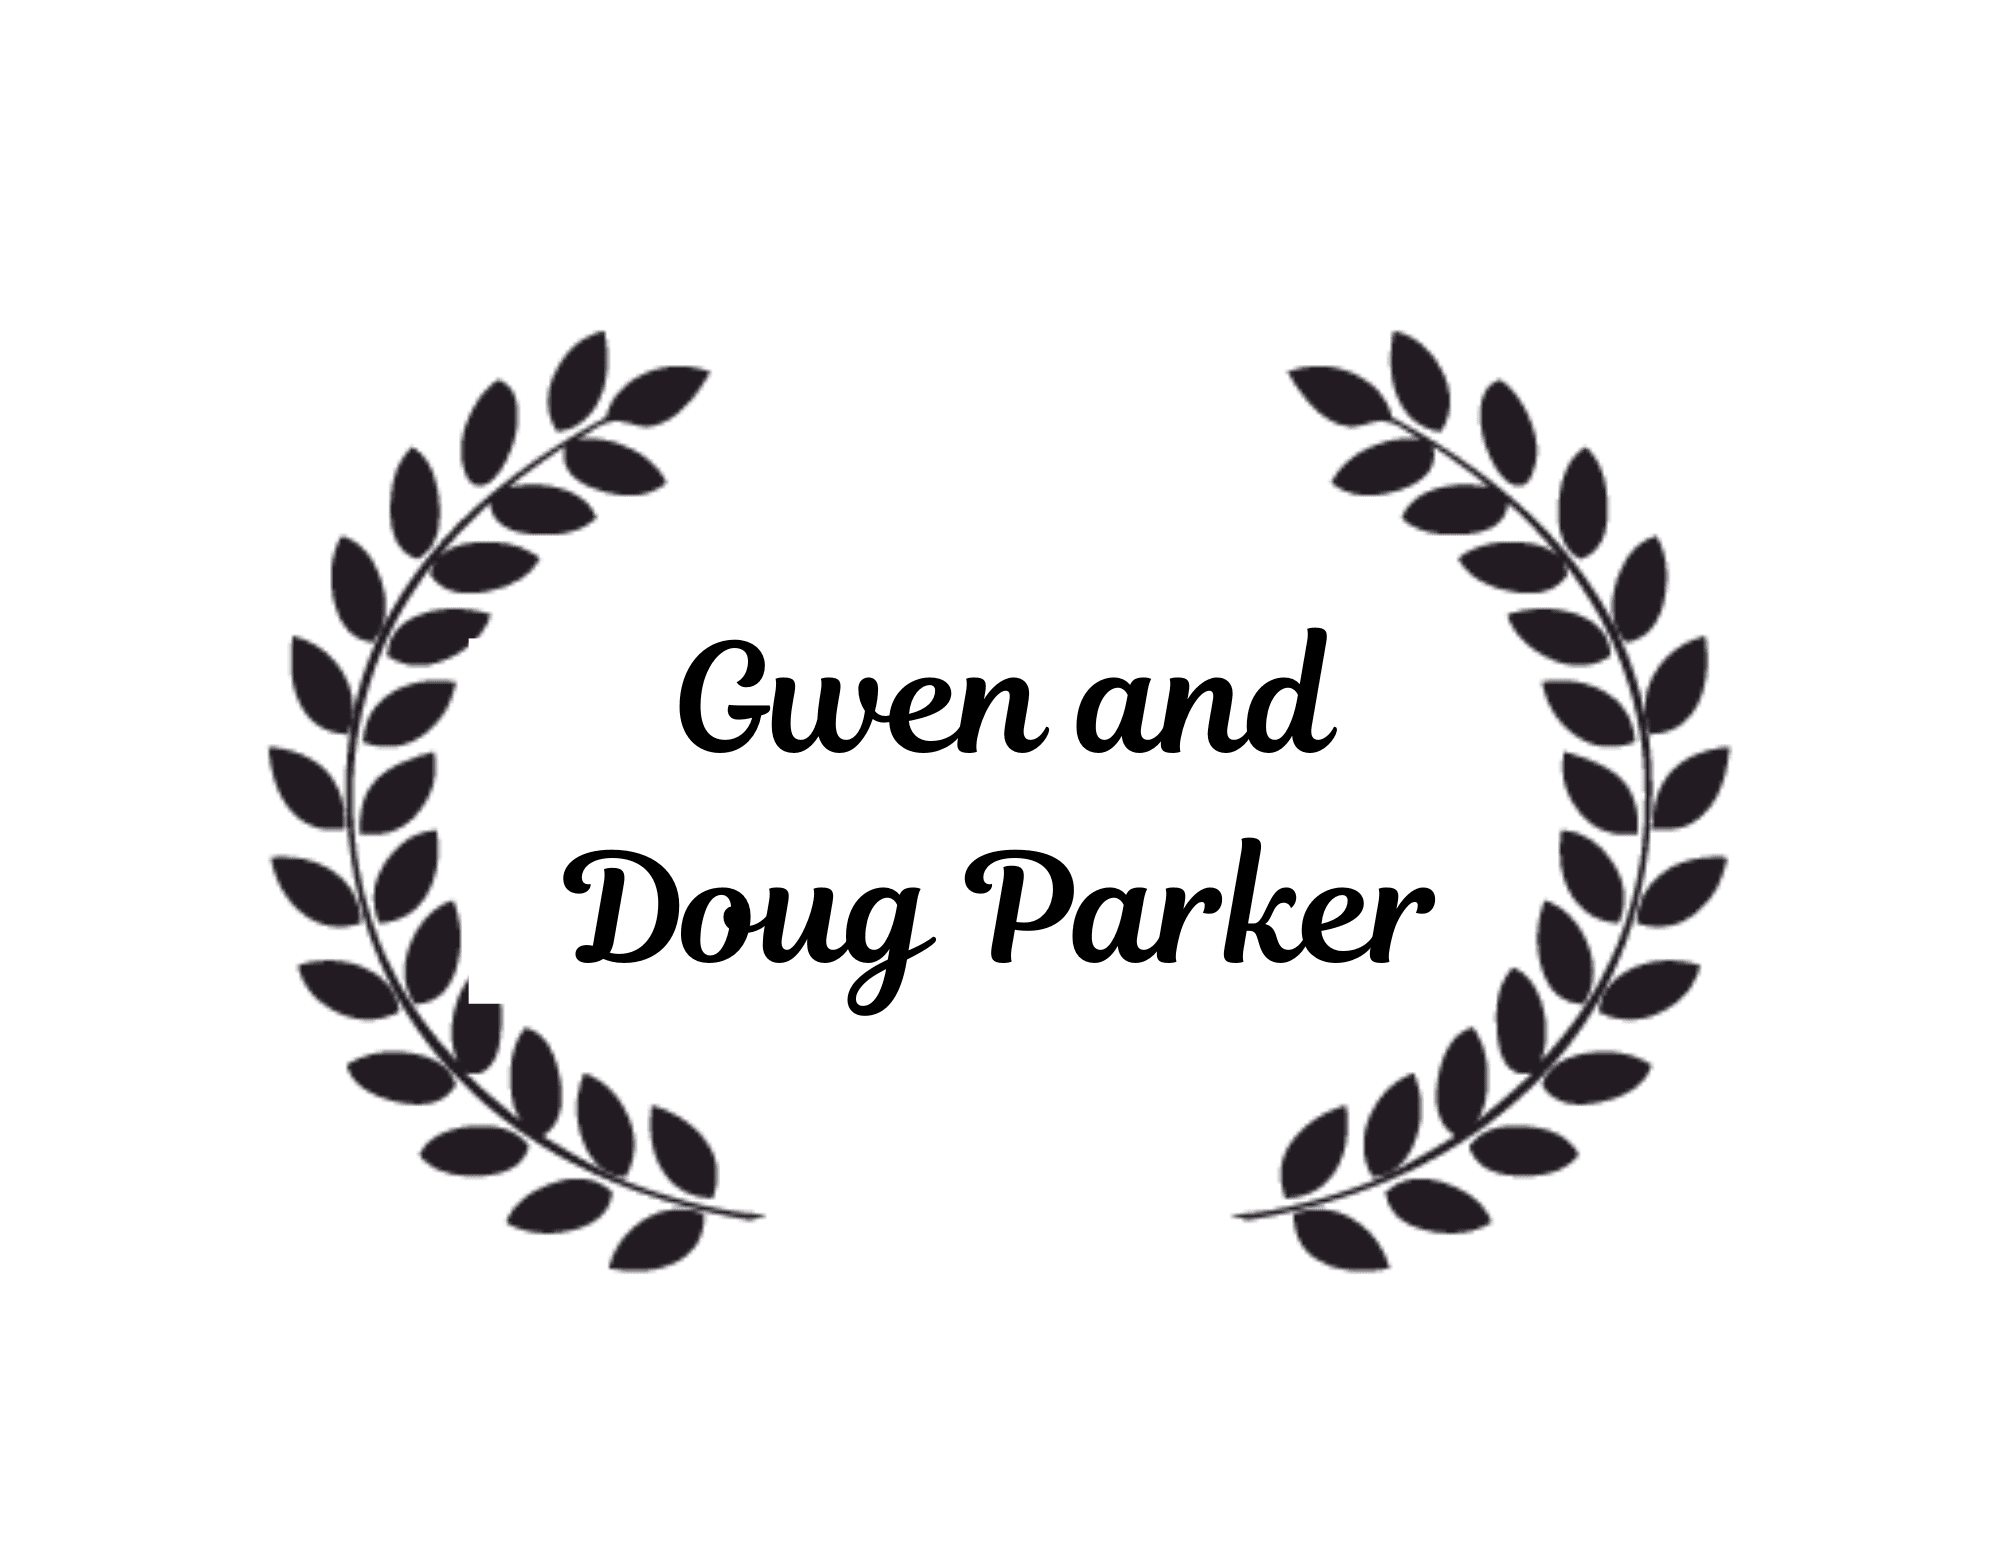 Gwen and Doug Parker